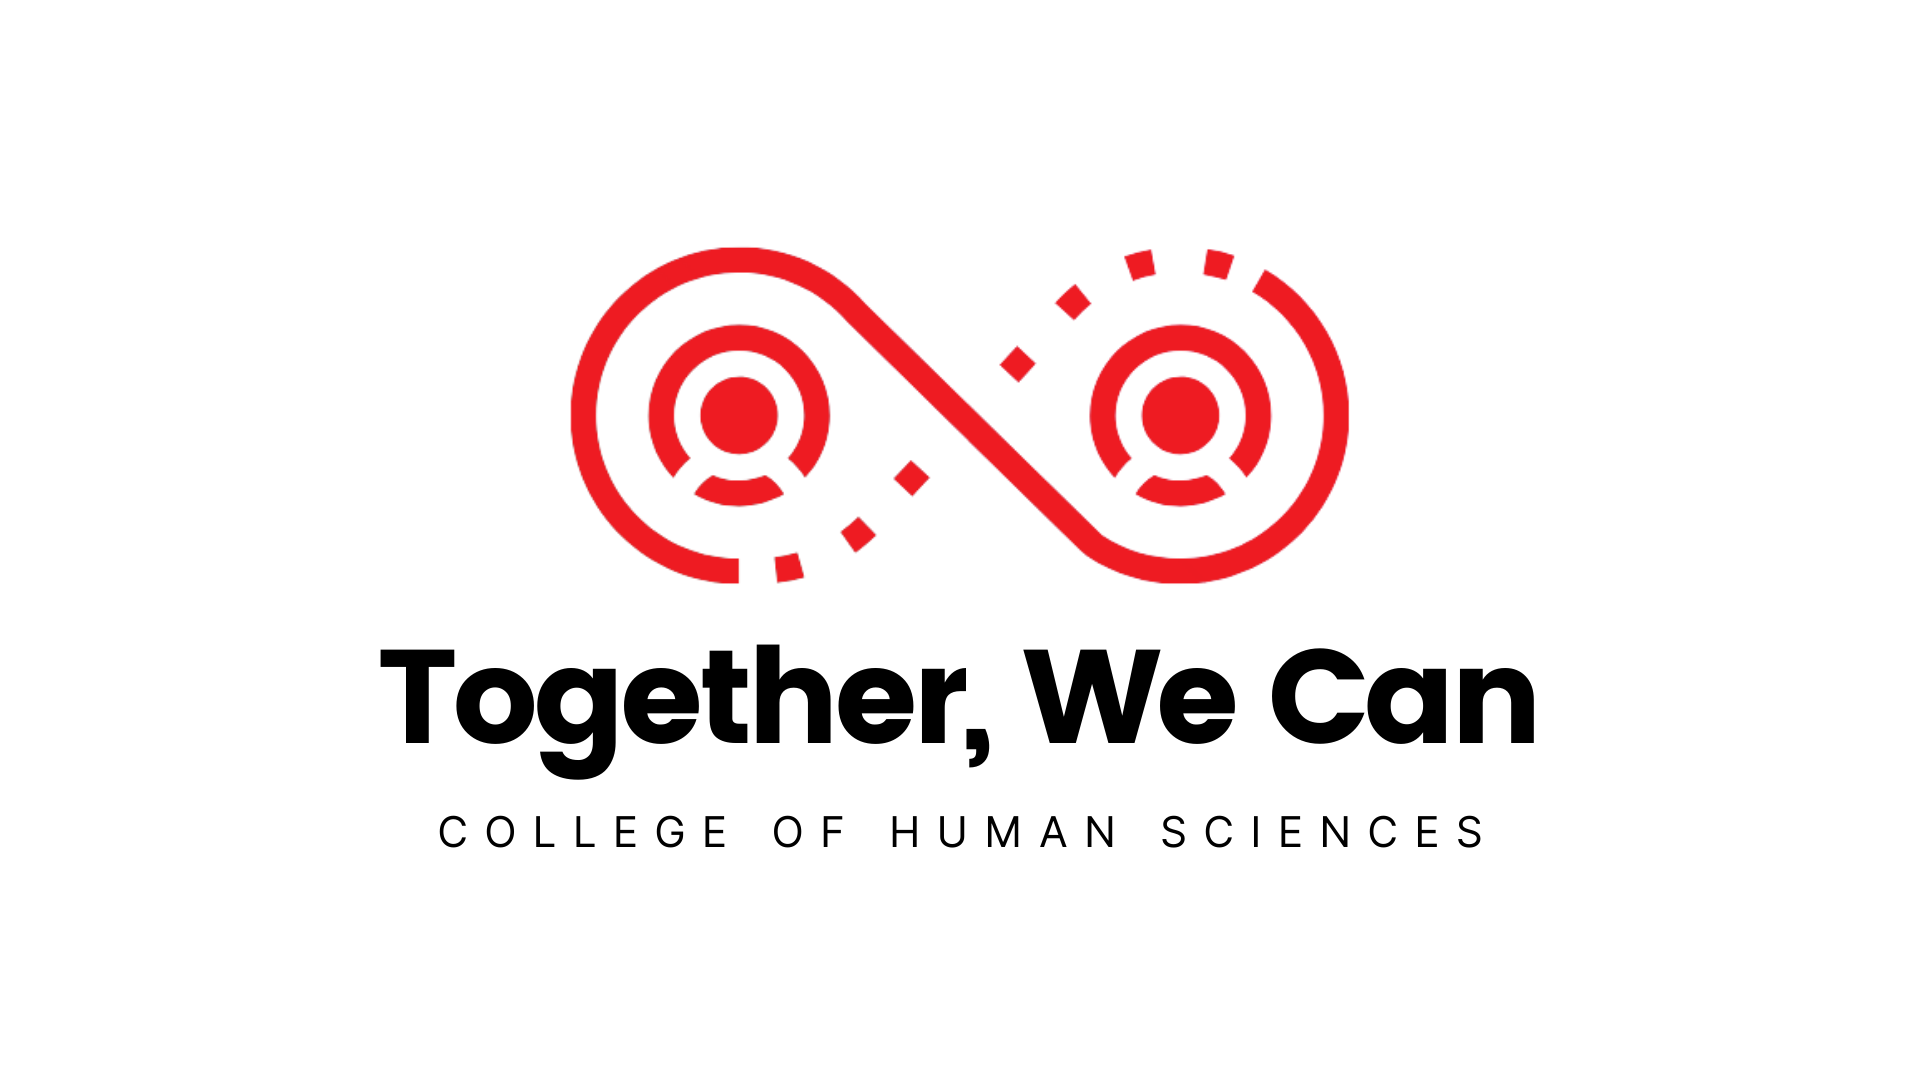 Together, We Can - College of Human Sciences